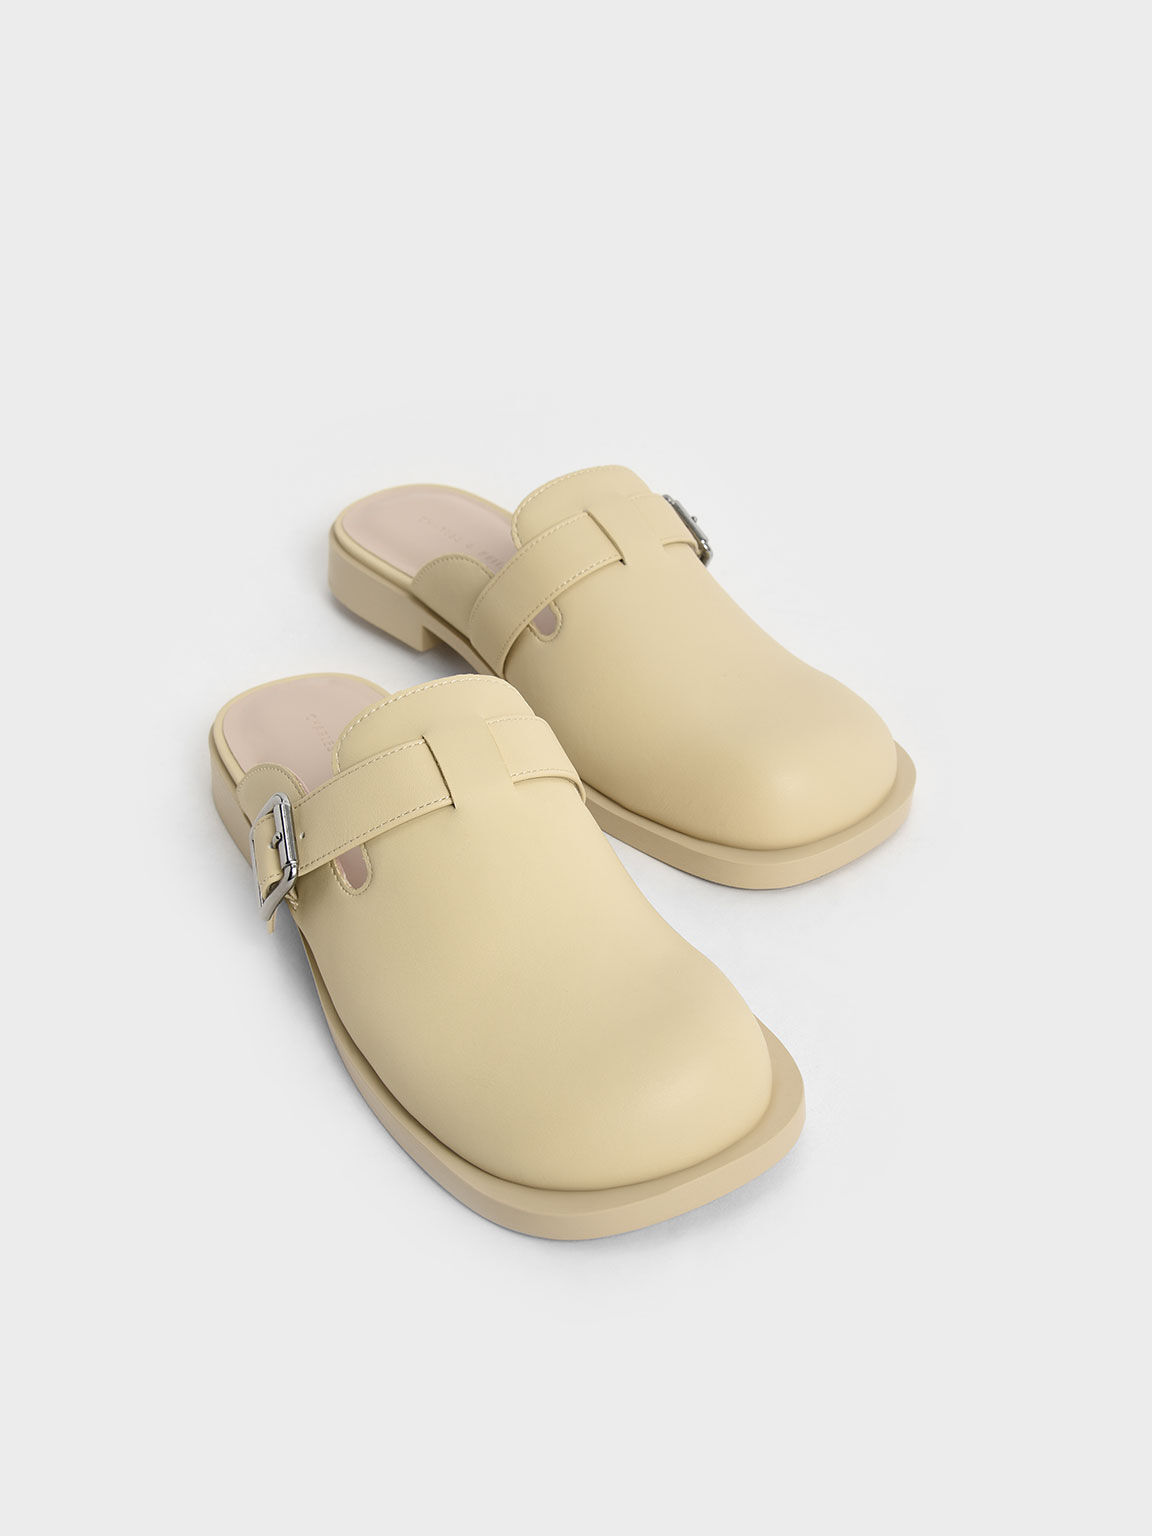 Buckled Round-Toe Loafer Mules, Yellow, hi-res